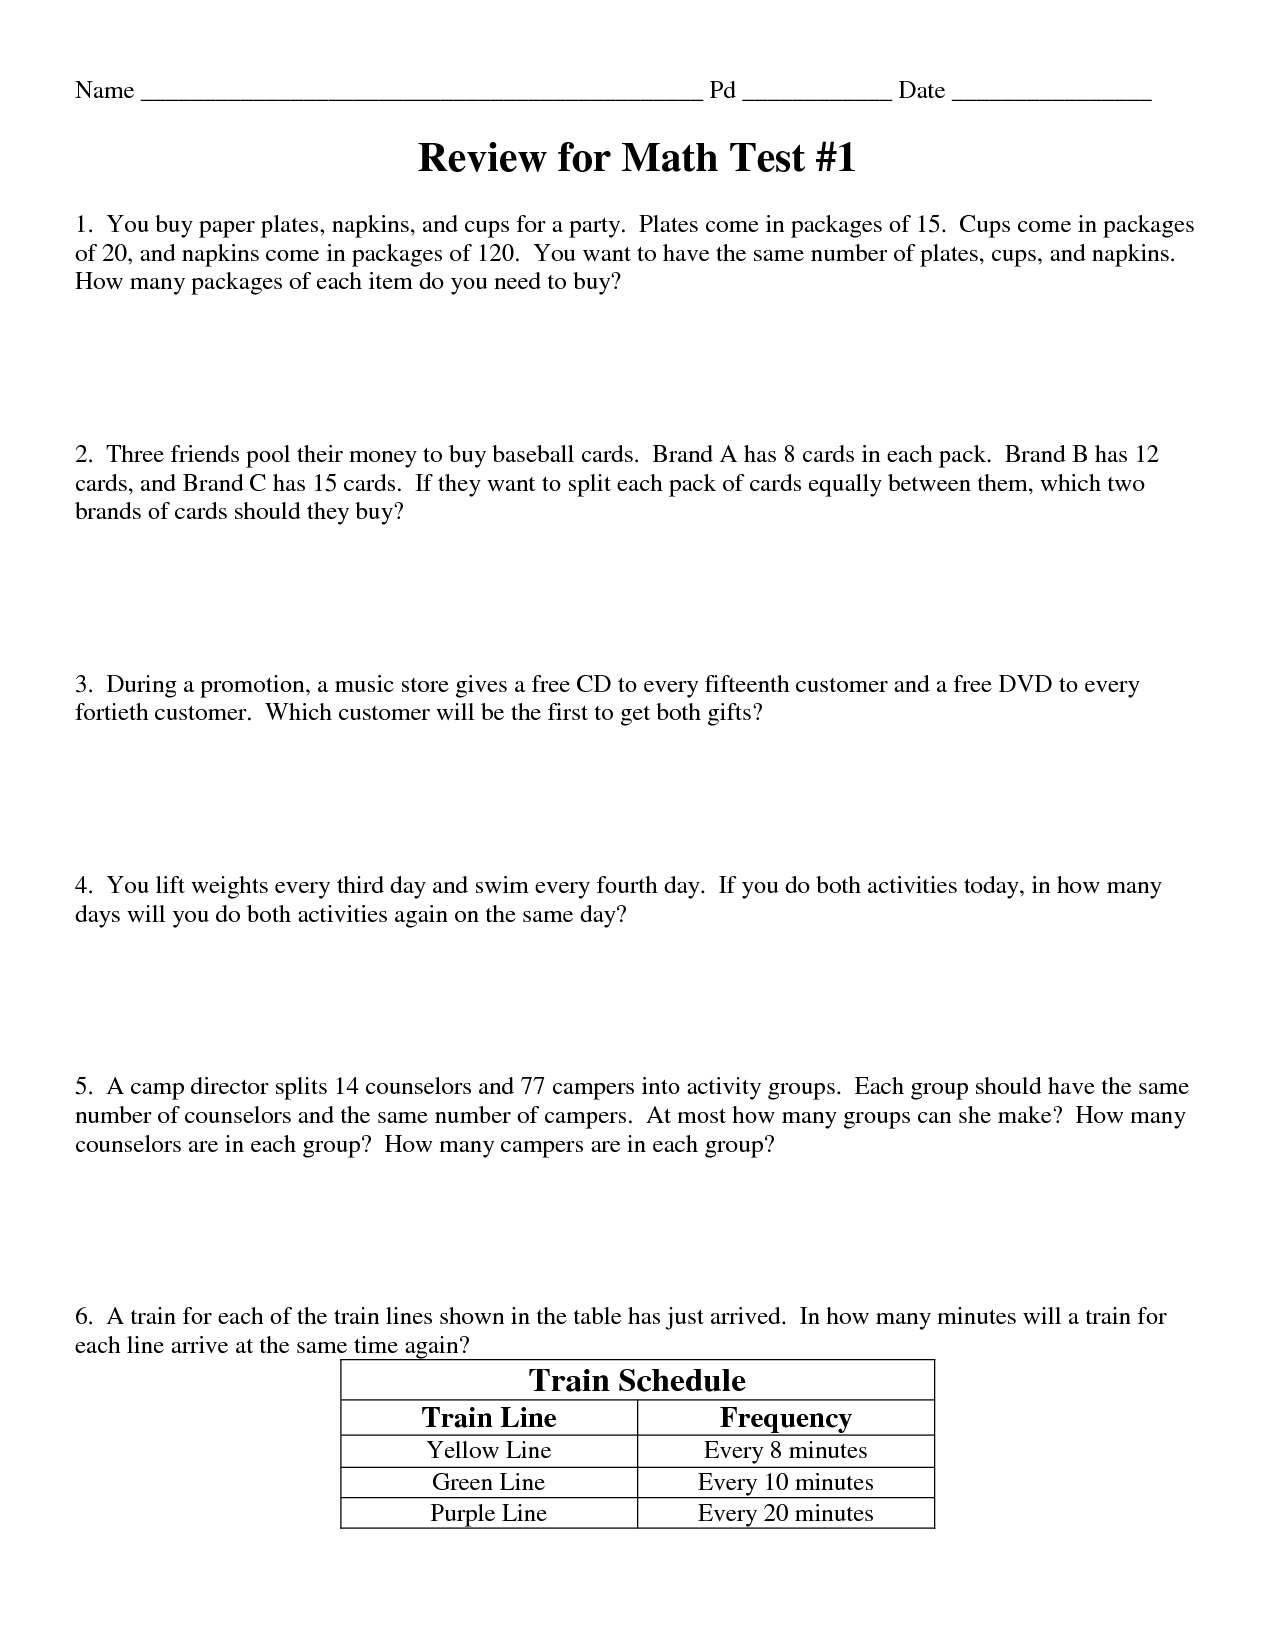 11-best-images-of-printable-greatest-common-factor-worksheets-least-common-multiple-word